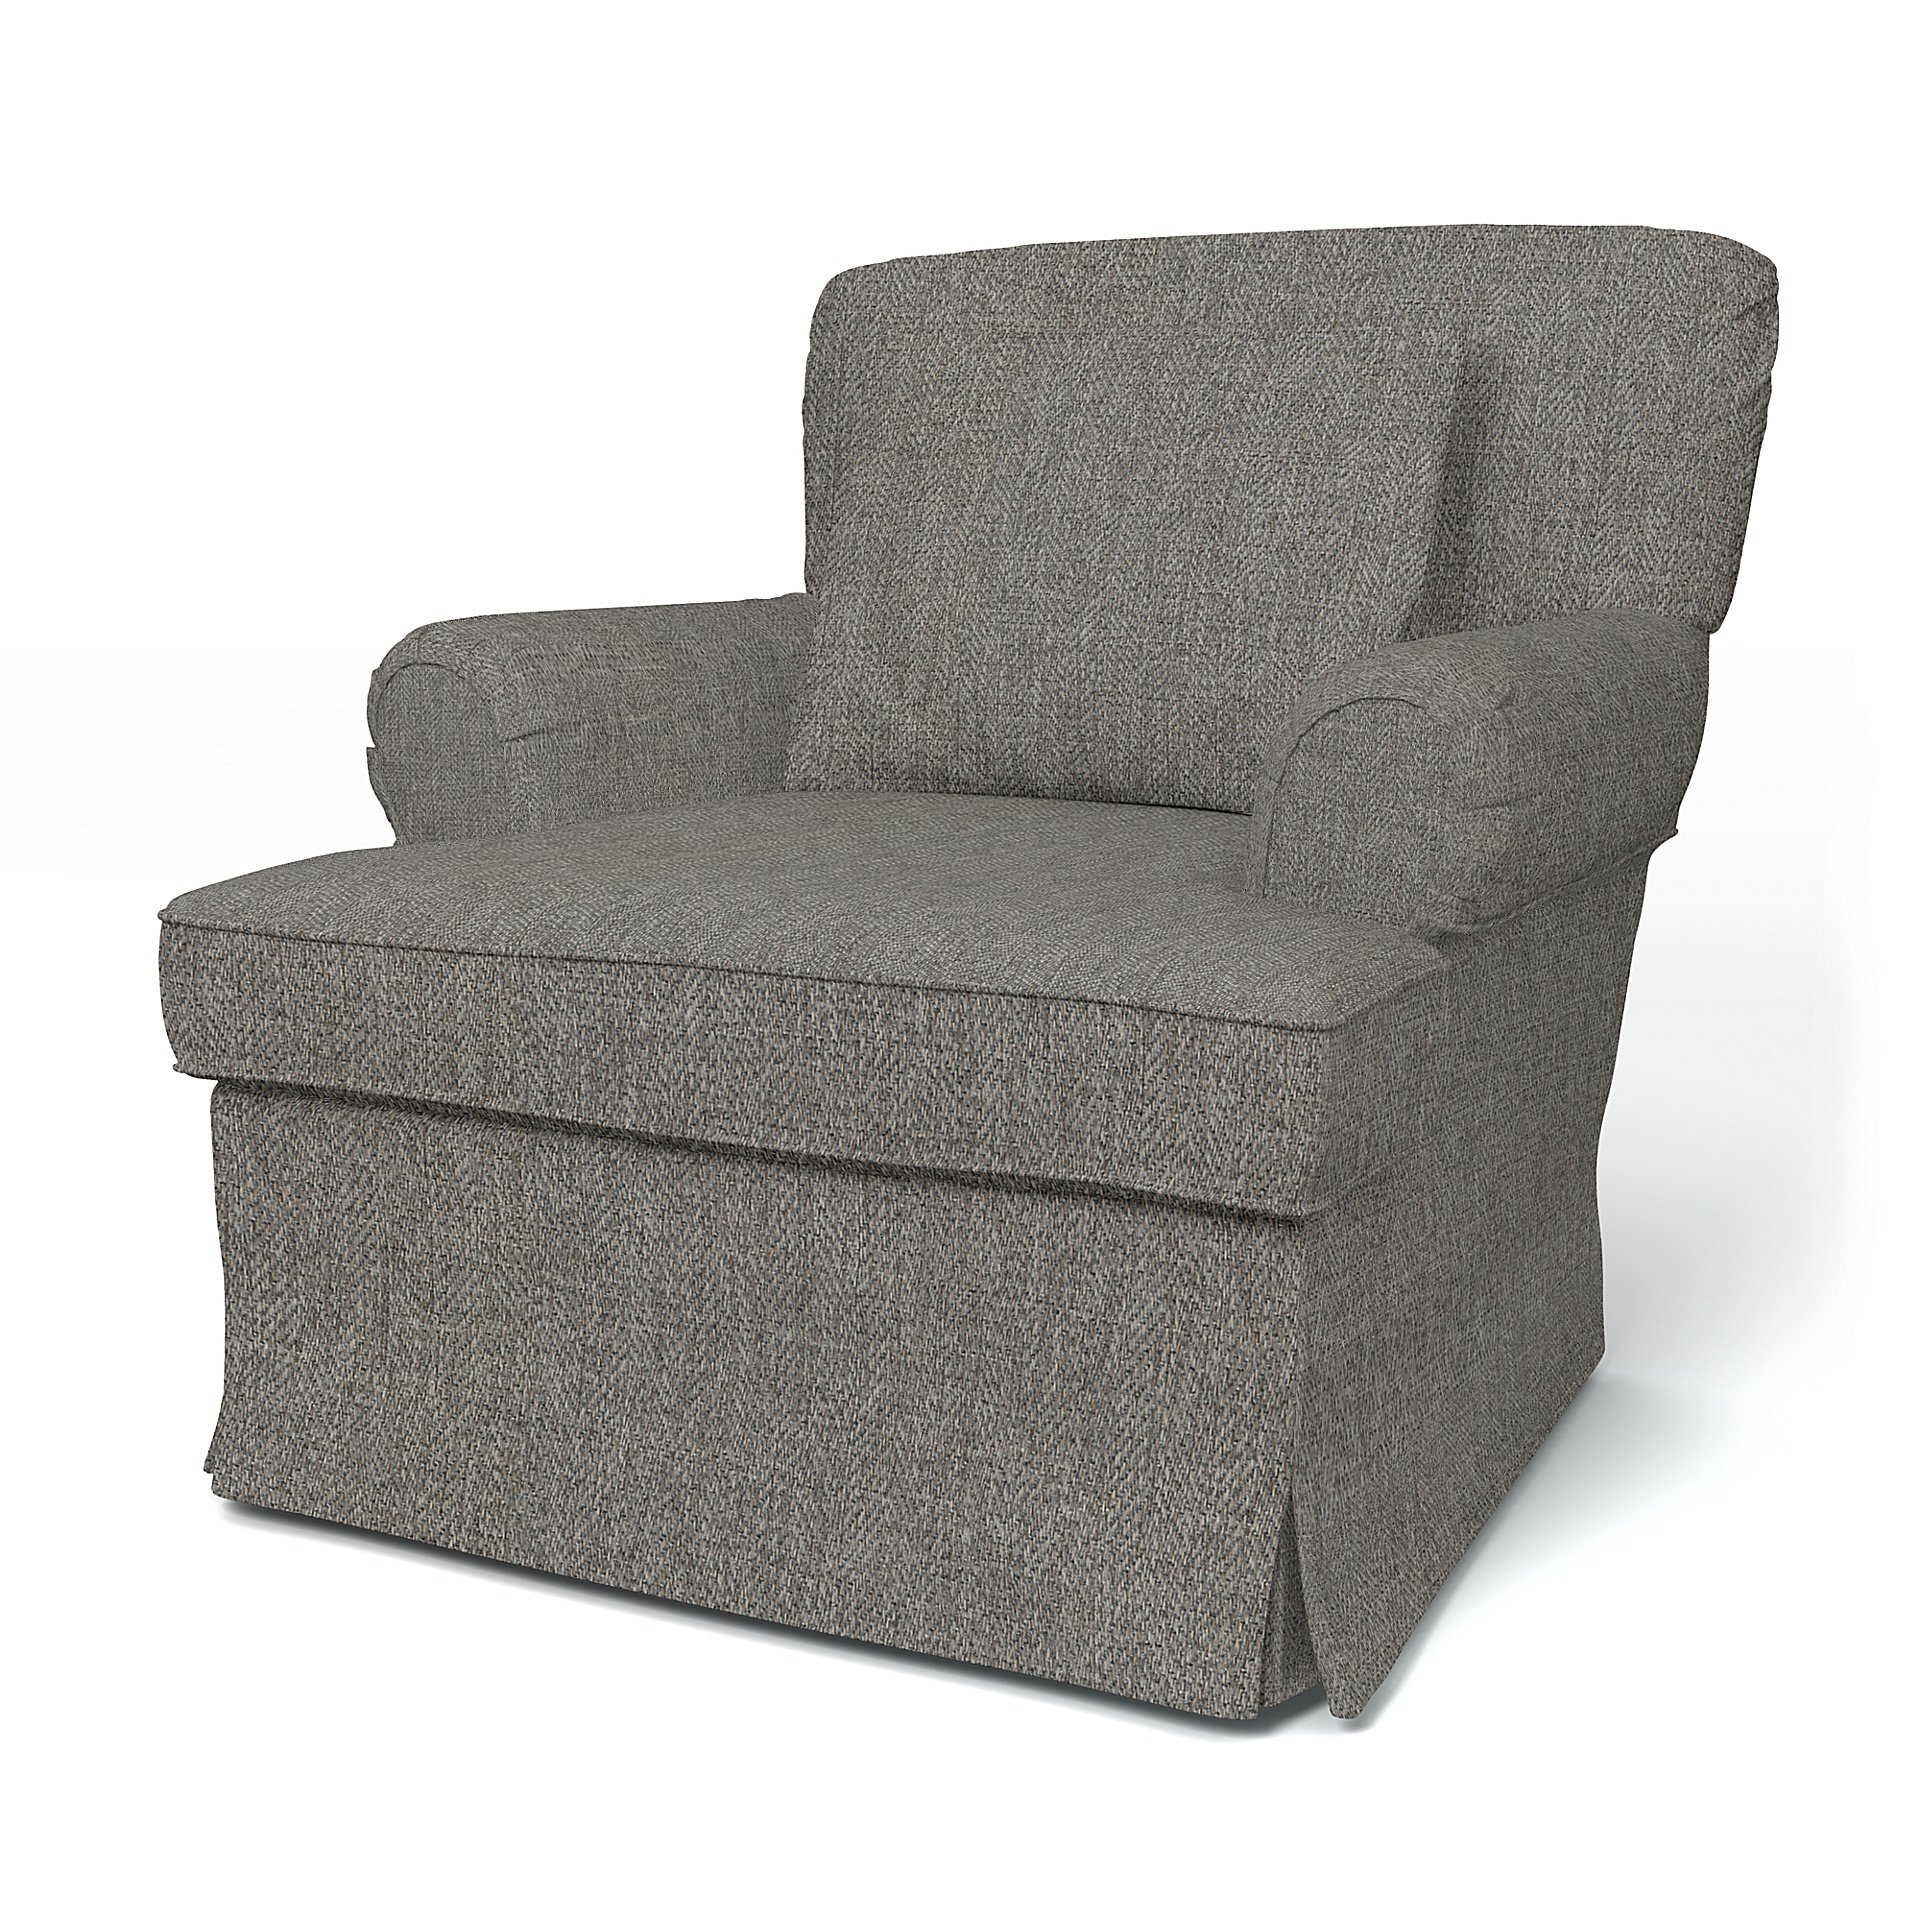 IKEA - Stockholm Armchair Cover (1994-2000) Standard, Taupe, Boucle & Texture - Bemz